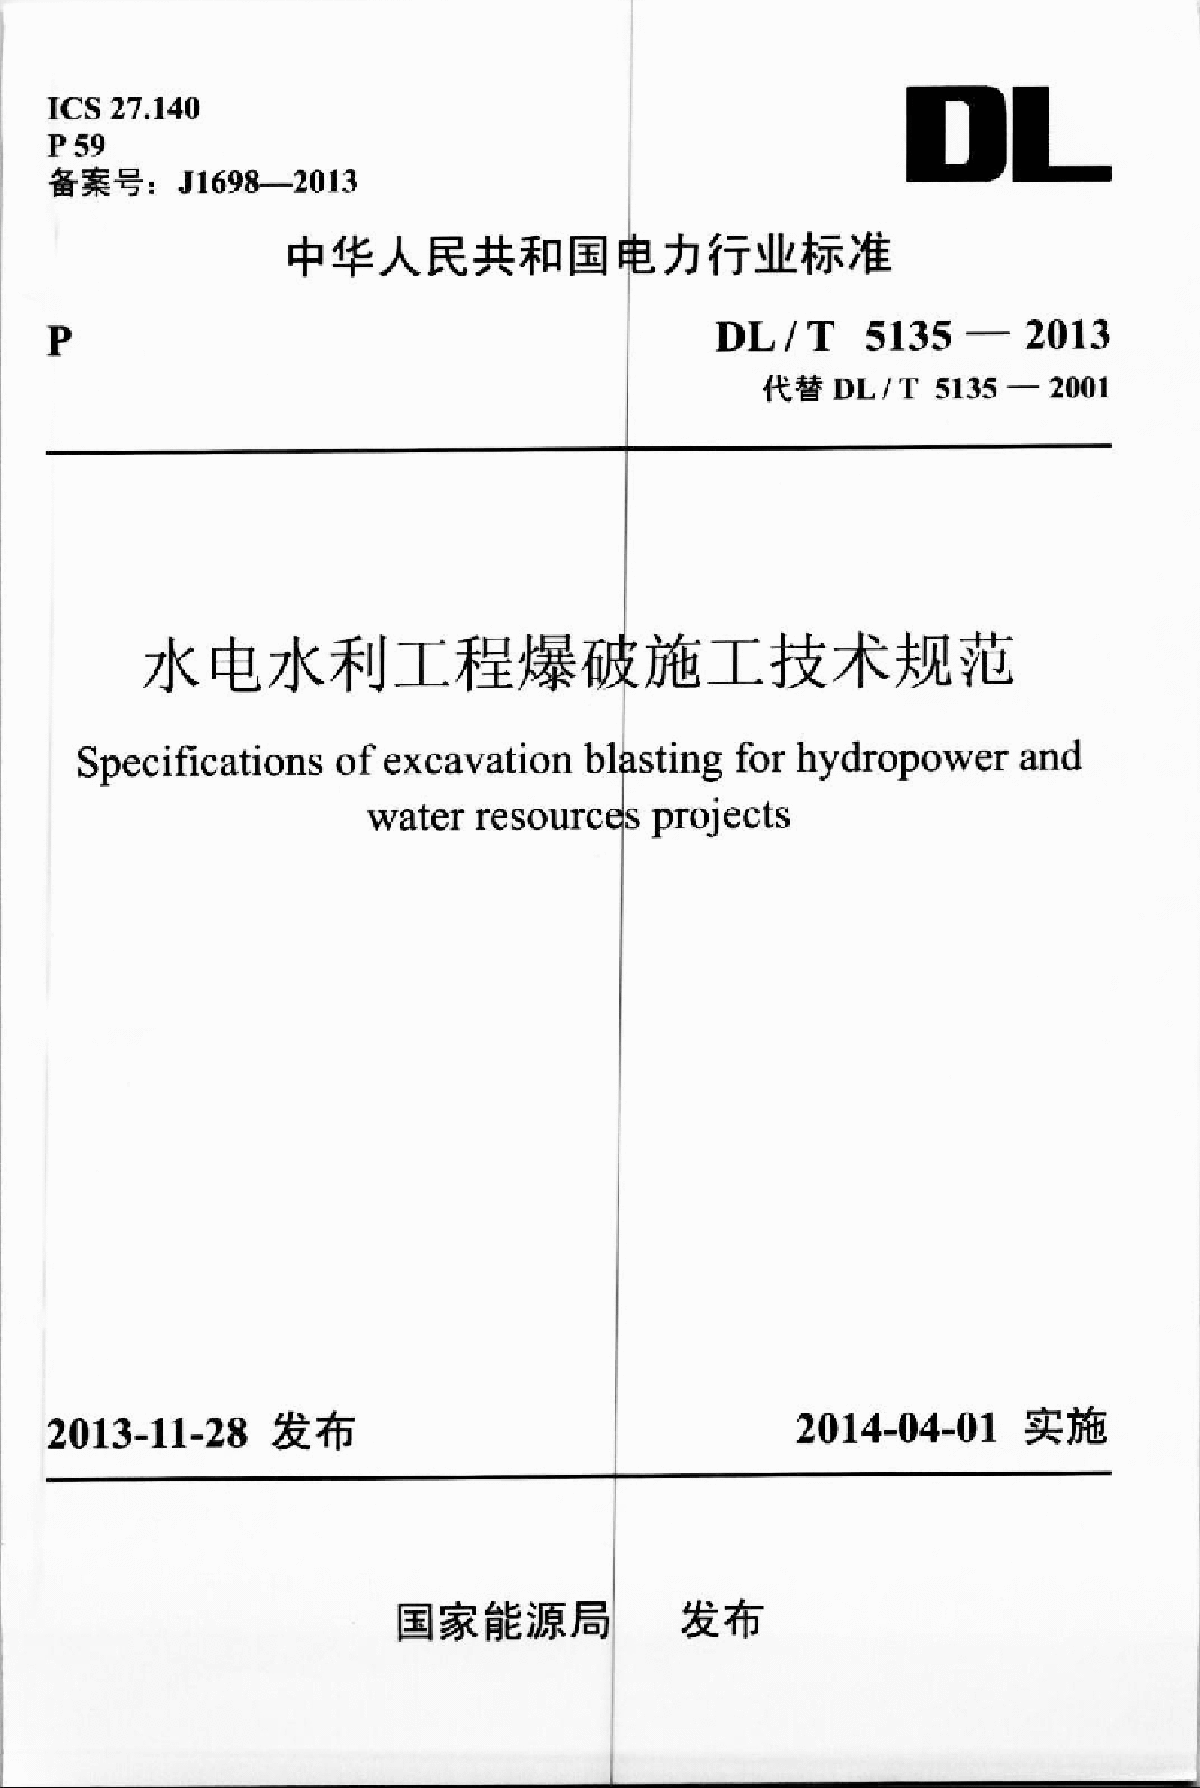  Figure I of Technical Specification for Blasting Construction of Hydropower and Water Conservancy Projects 5135-2013